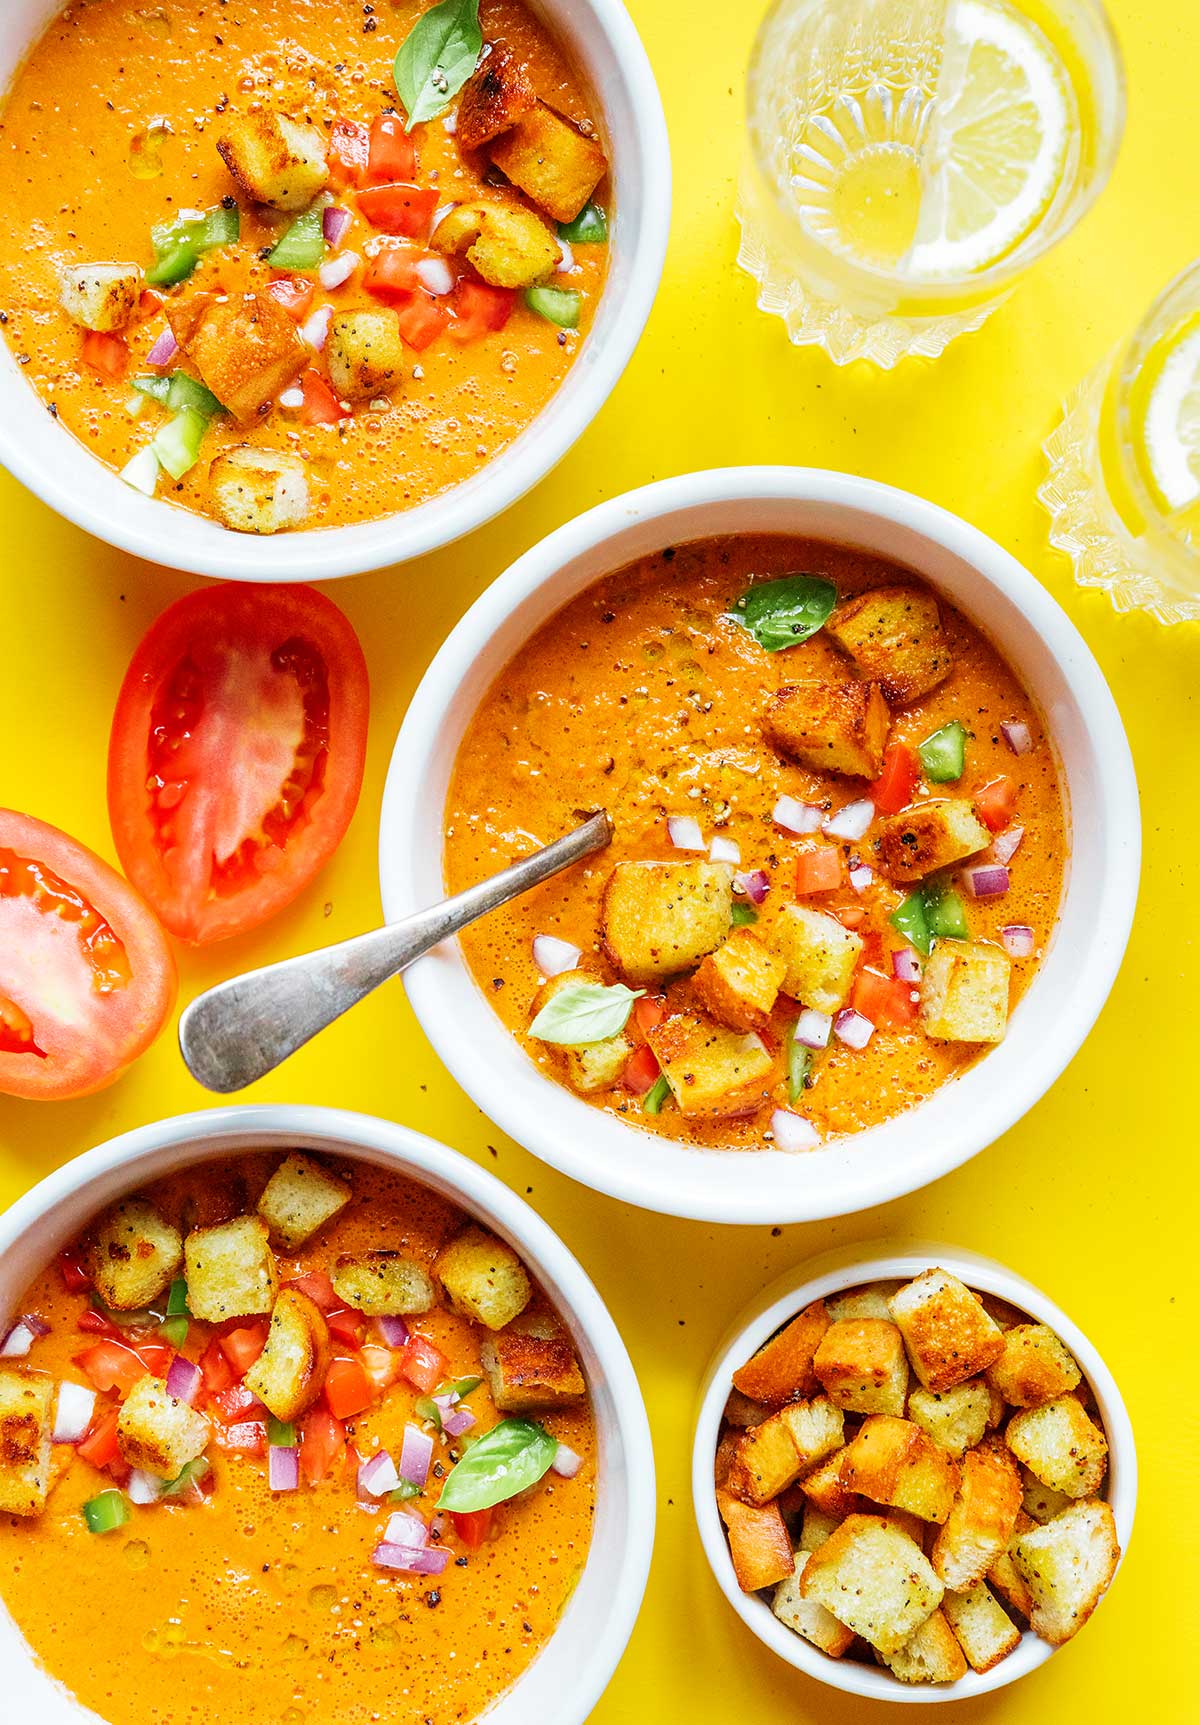 Two bowls of tomato gazpacho topped with croutons, tomatoes, green peppers, and red onion